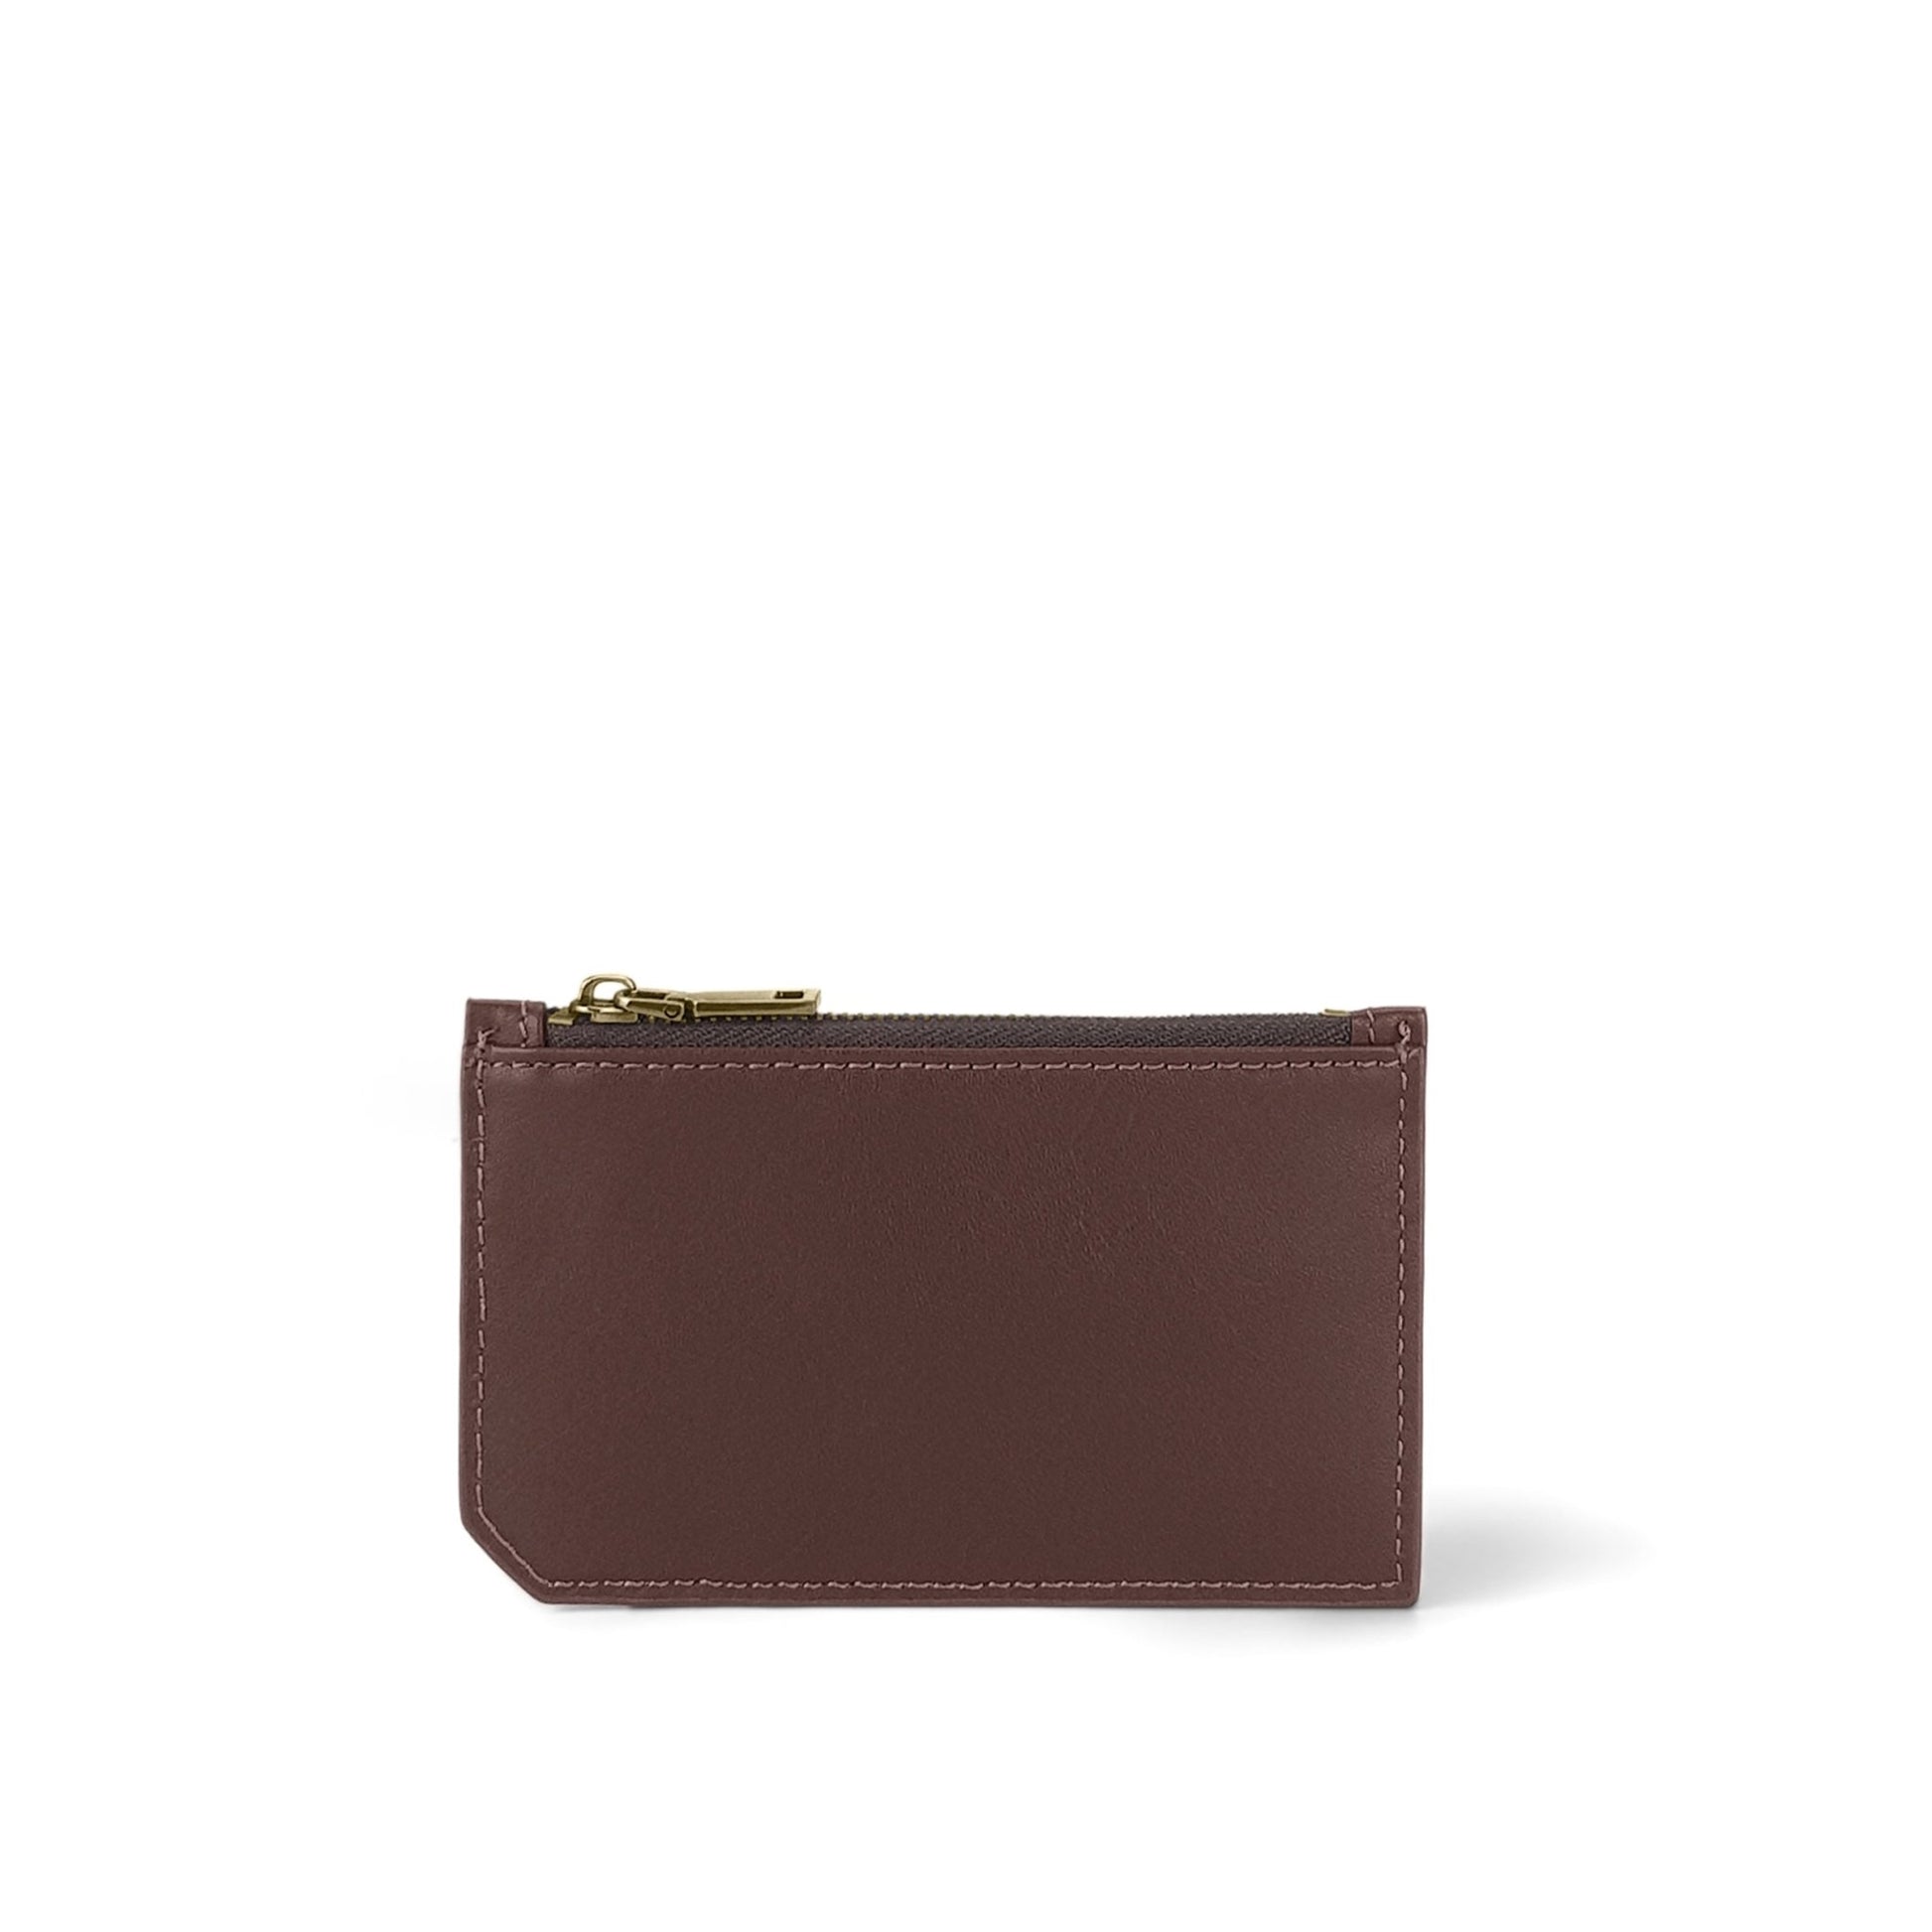 SEMPRE Card Holder with Zip - www.countryhide.com